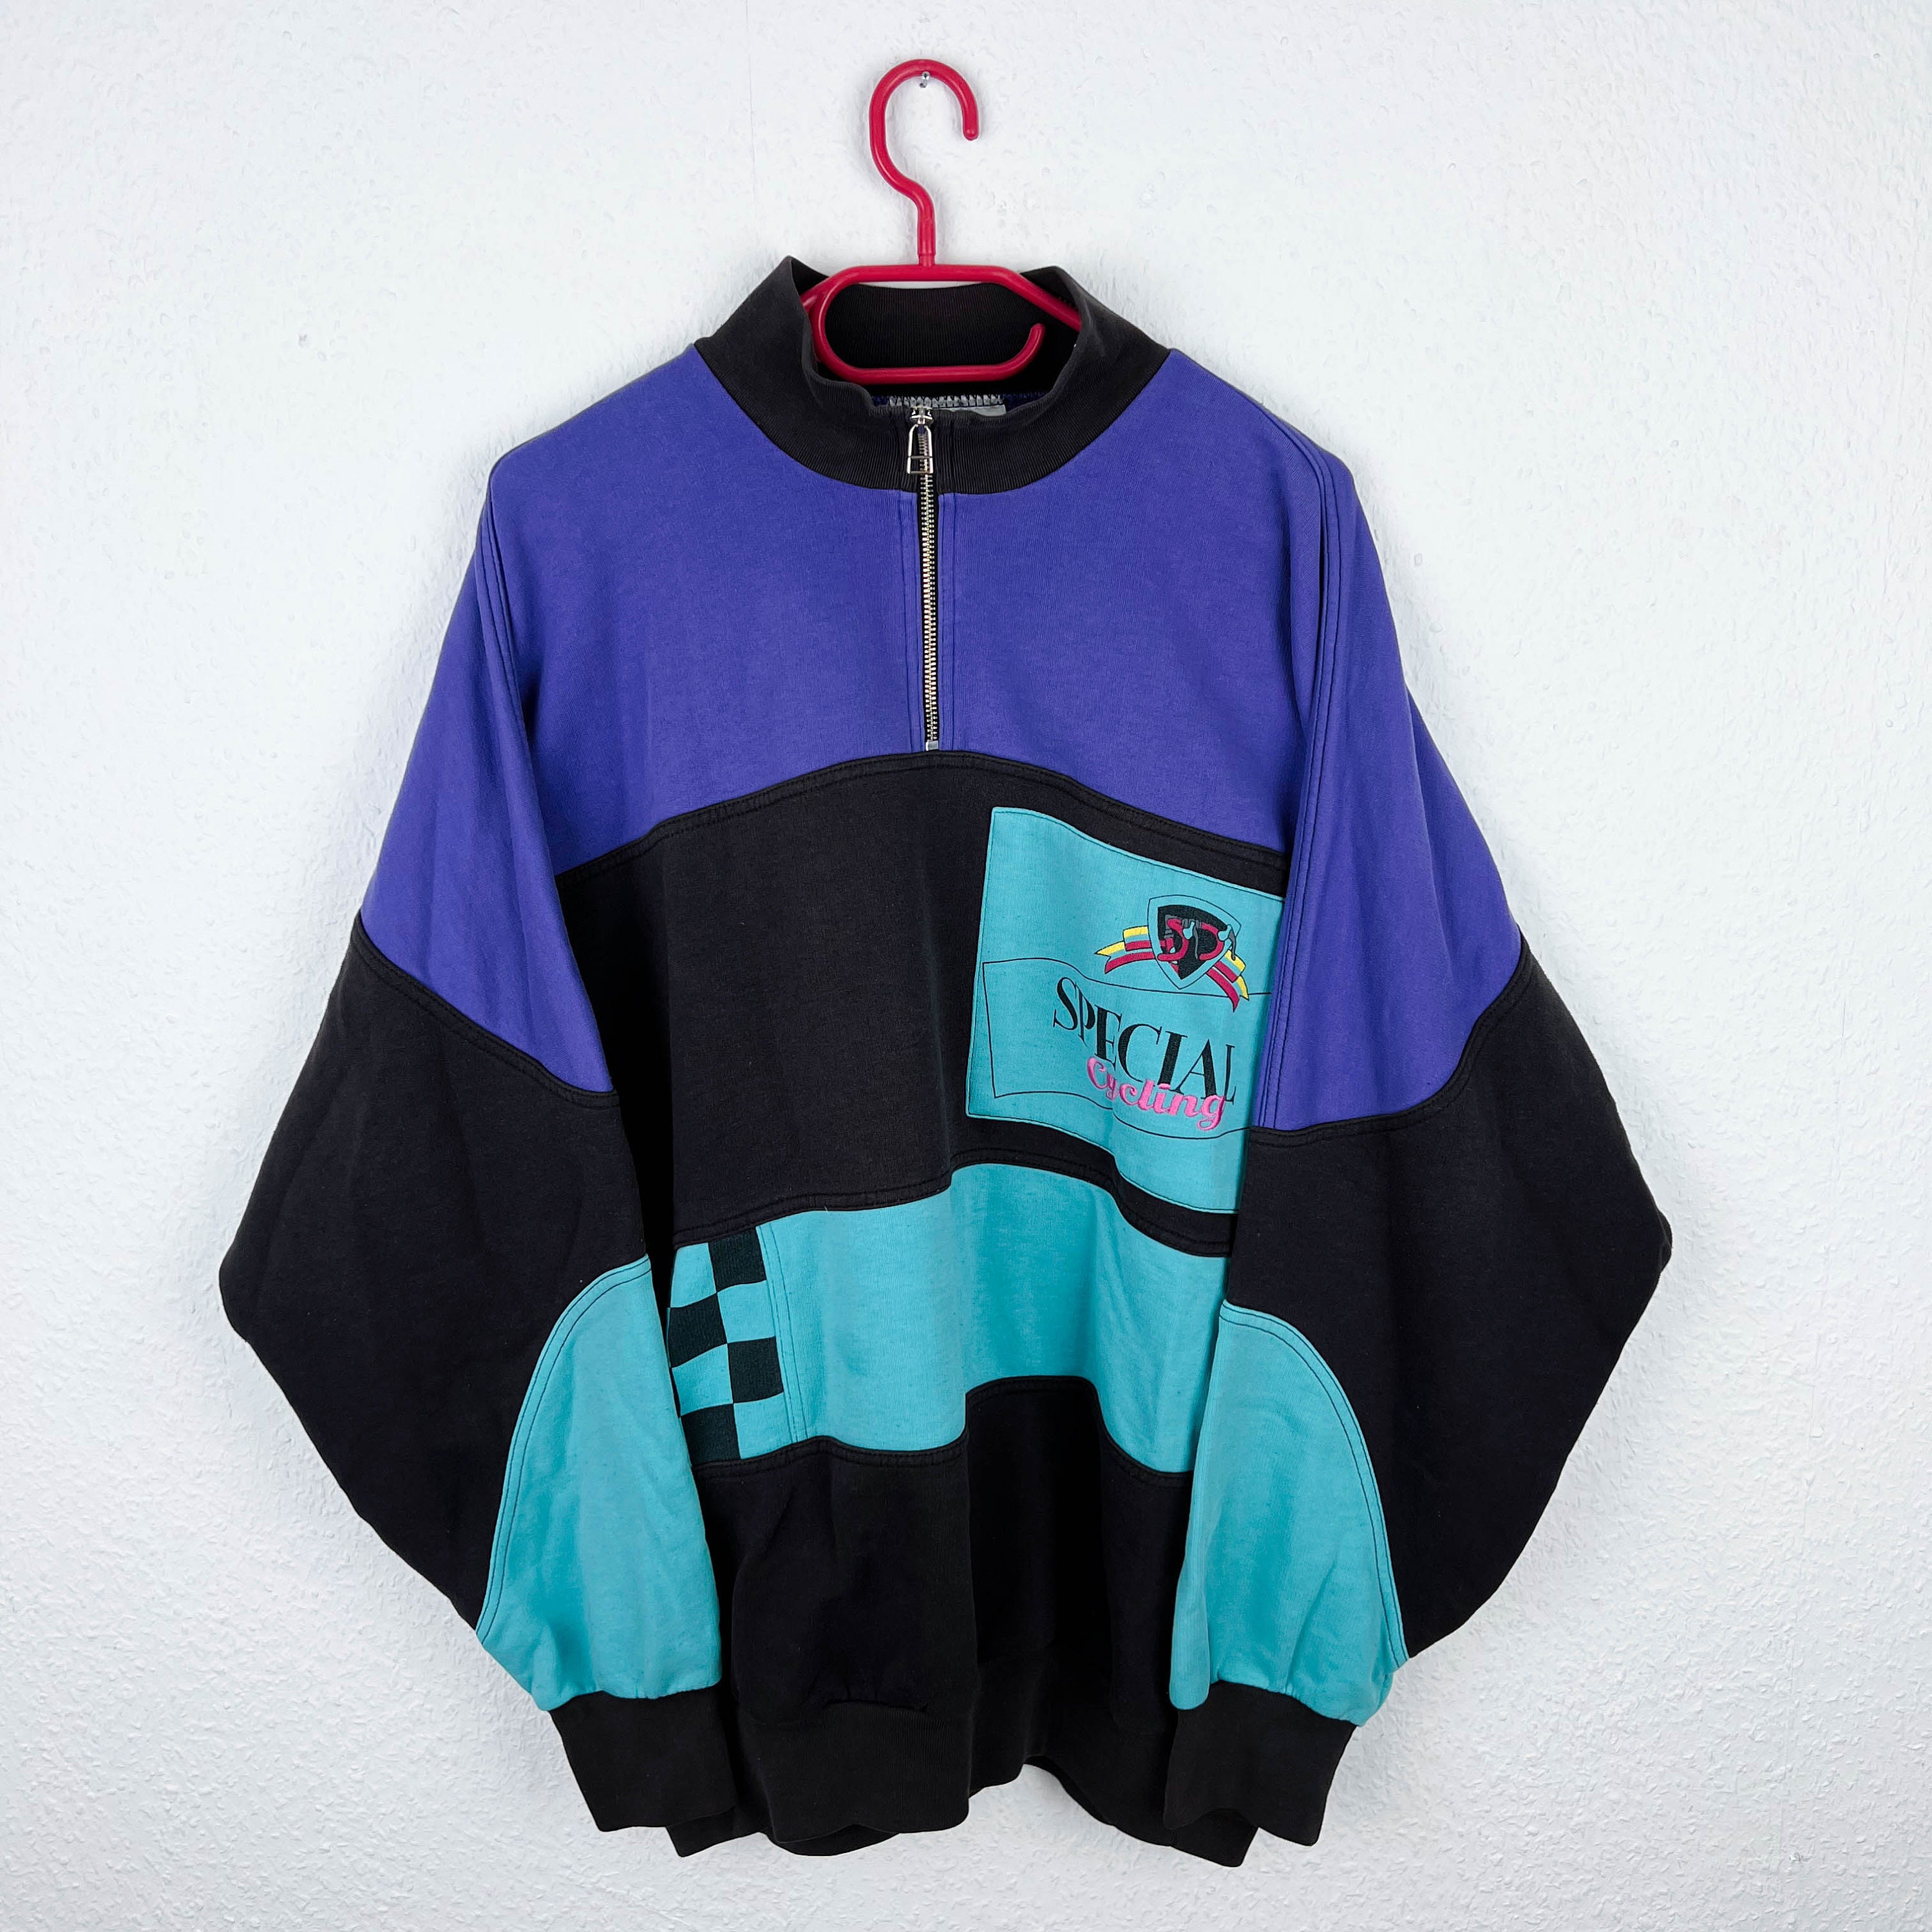 Vintage Adidas Sweater SIZE L Cycling Take Off - Etsy 日本